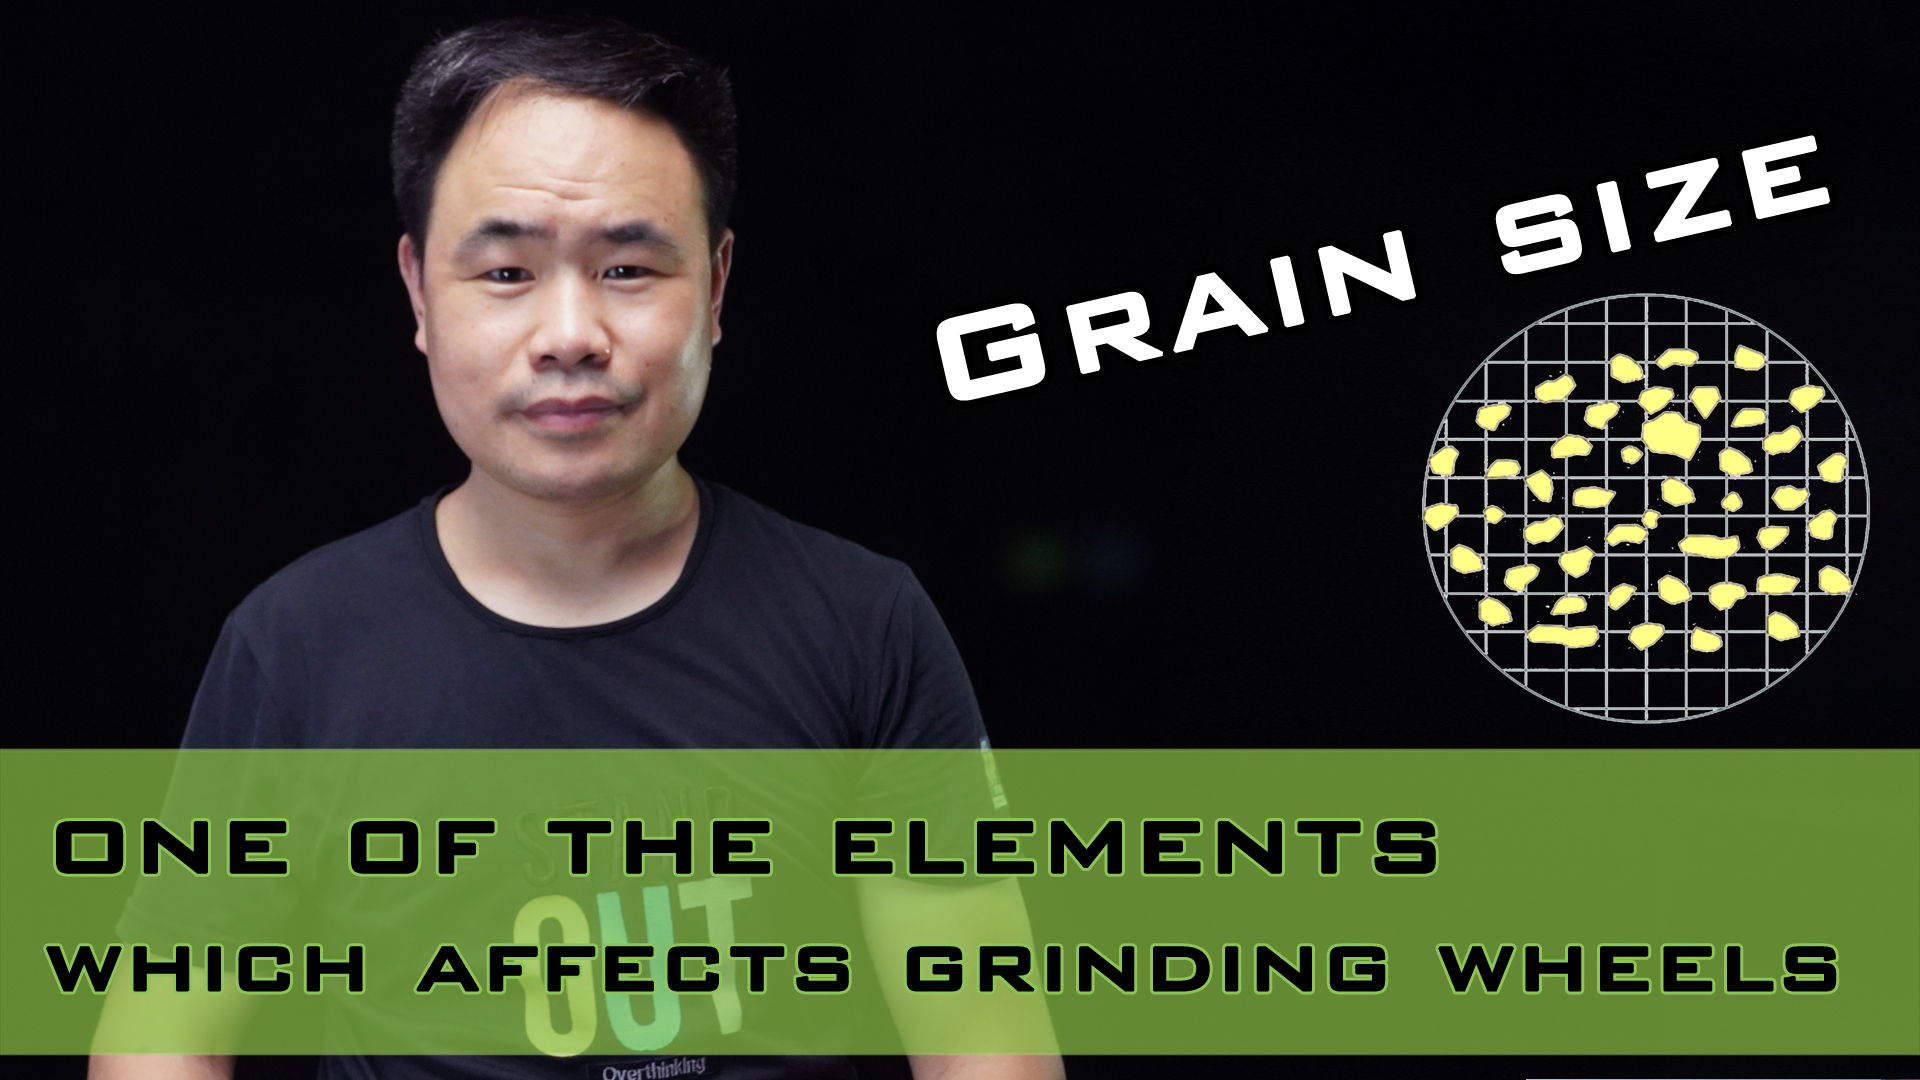 Abrasive grain size, which affects the work efficiency and surface finish of the grinding wheel